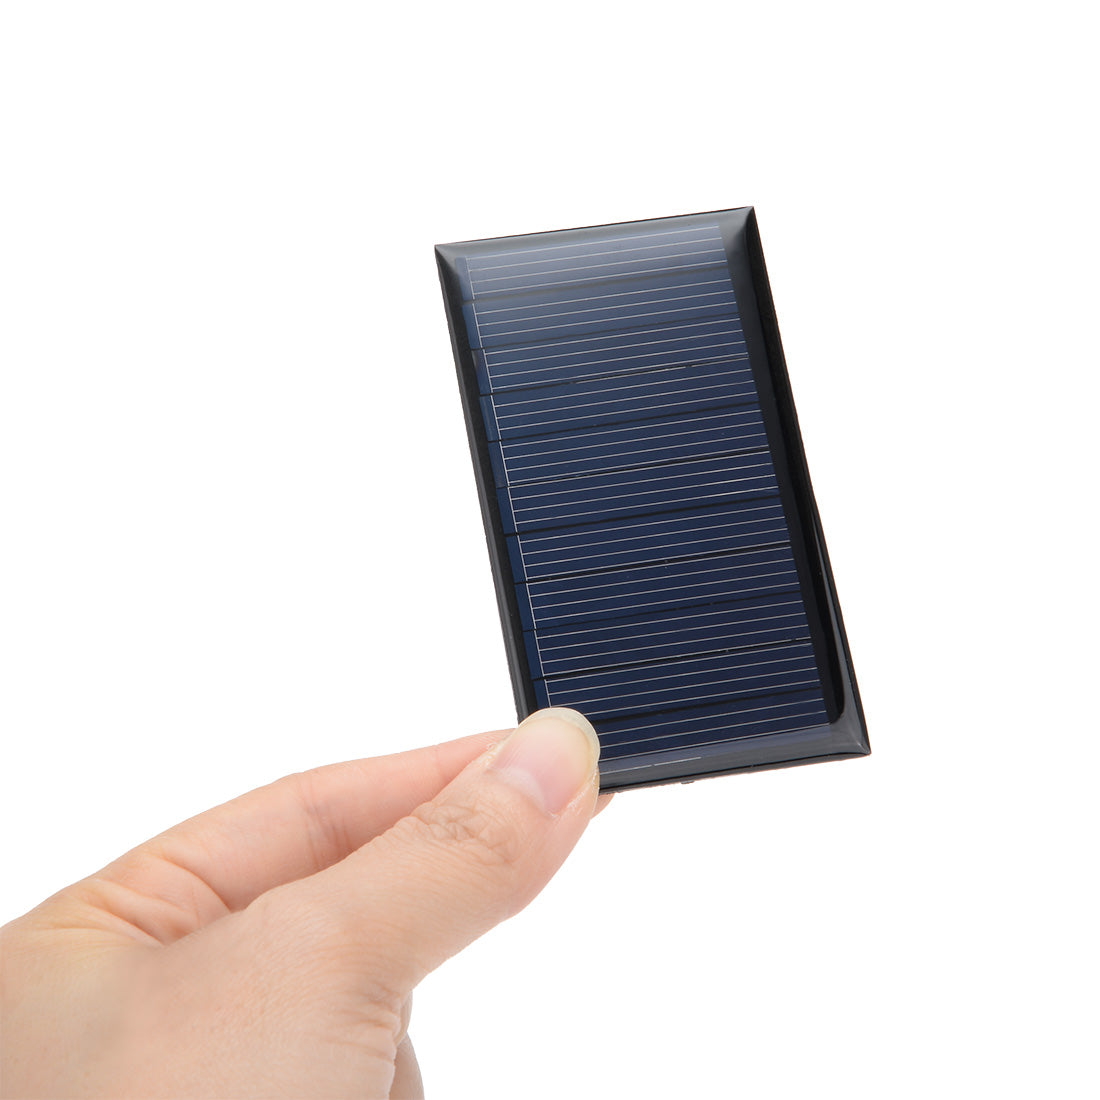 uxcell Uxcell 5Pcs 5V 70mA Poly Mini Solar Cell Panel Module DIY for Light Toys Charger 80mm x 45mm